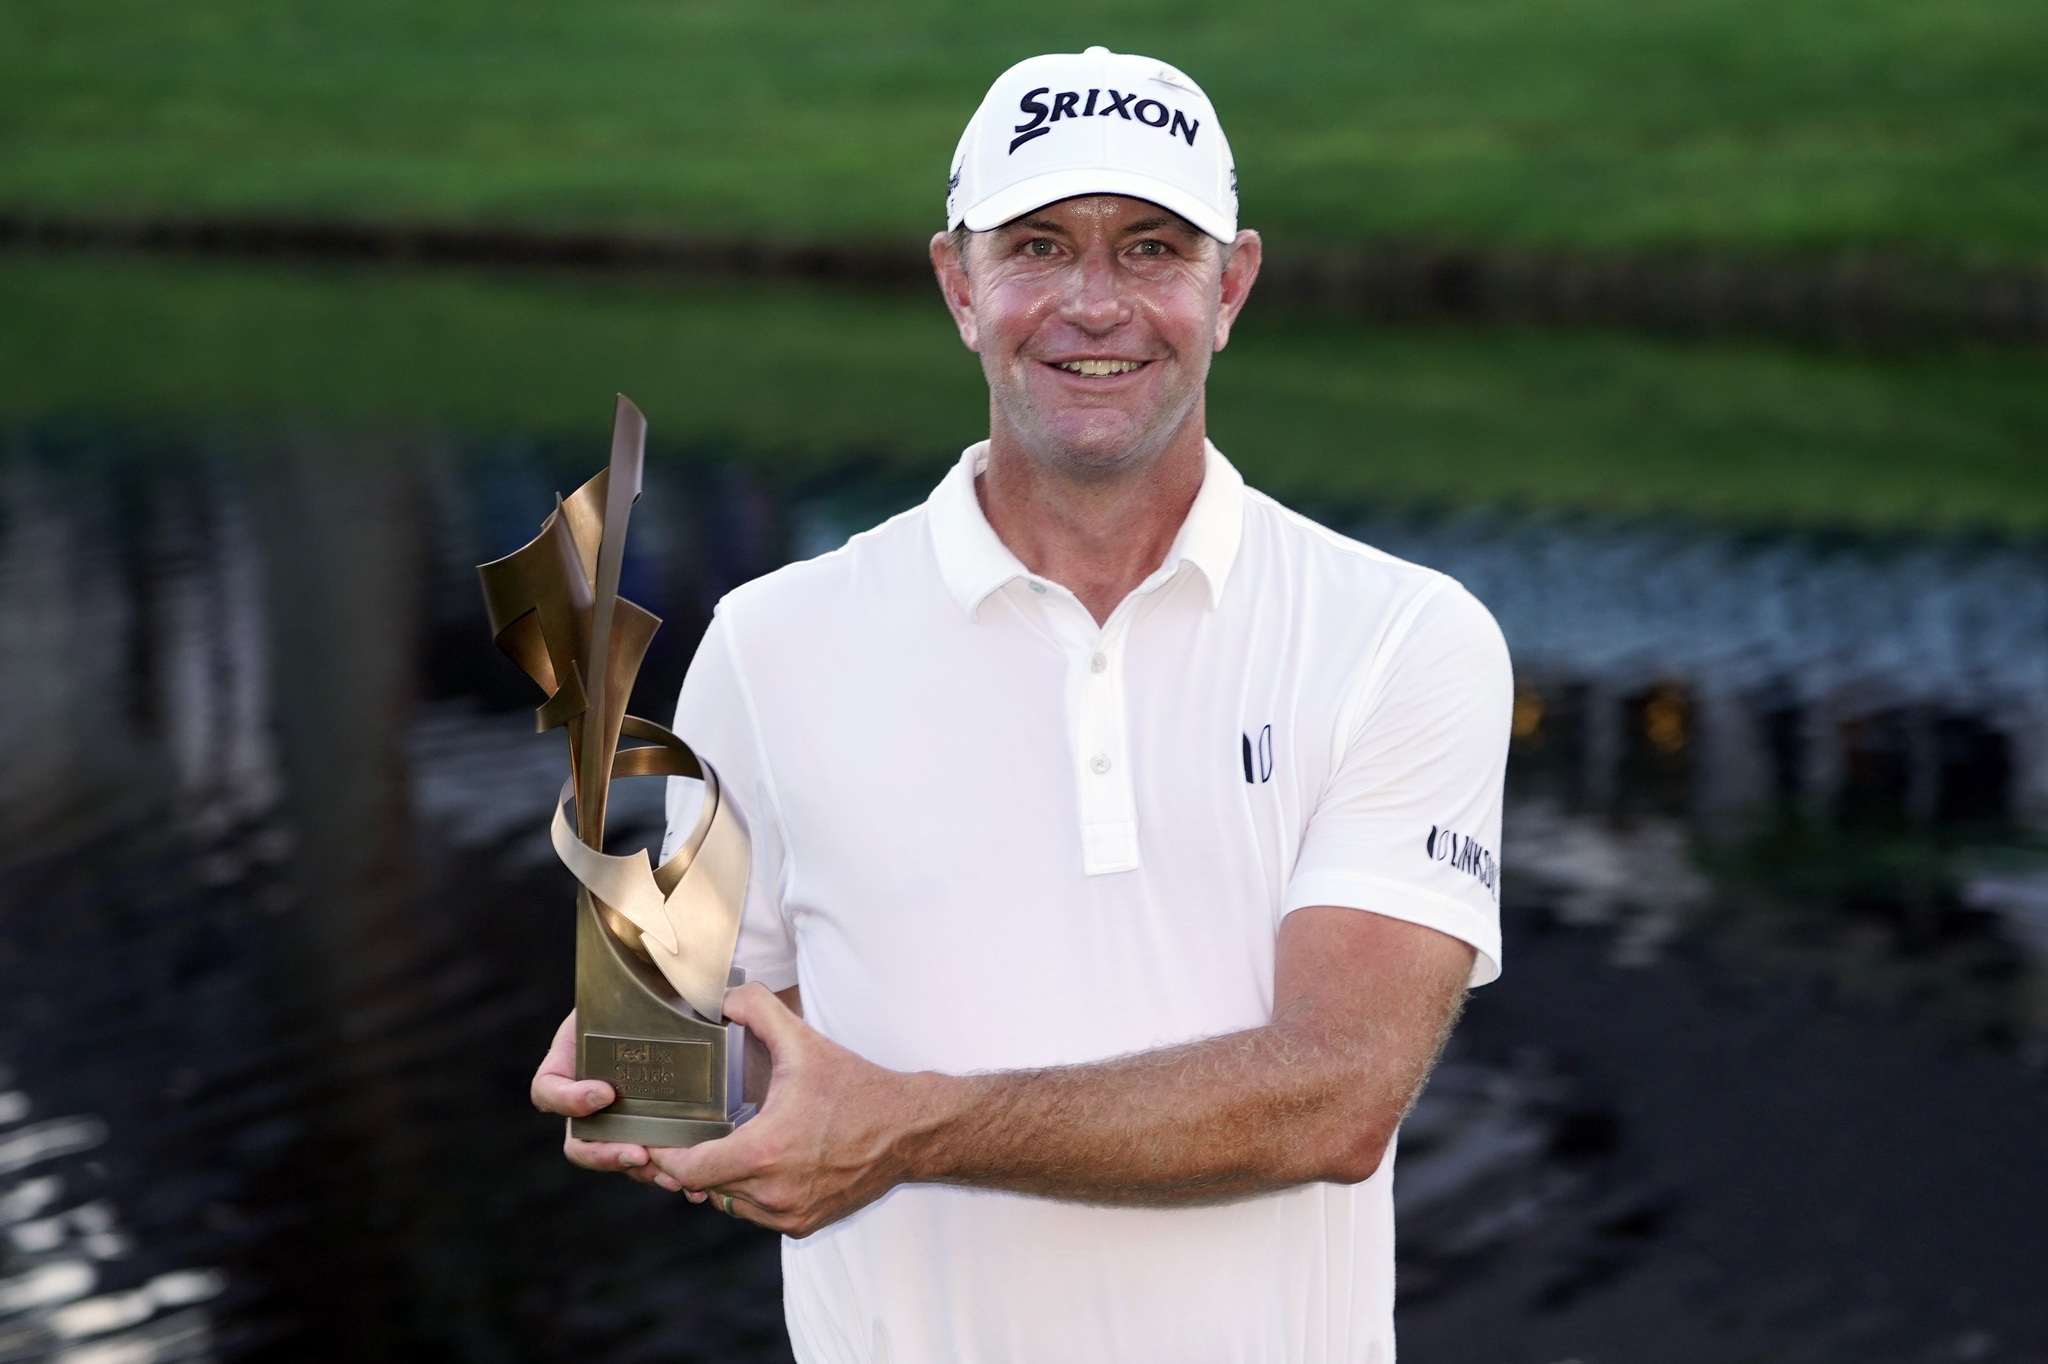 Lucas Glover holds the winner's trophy after winning the St. Jude Championship